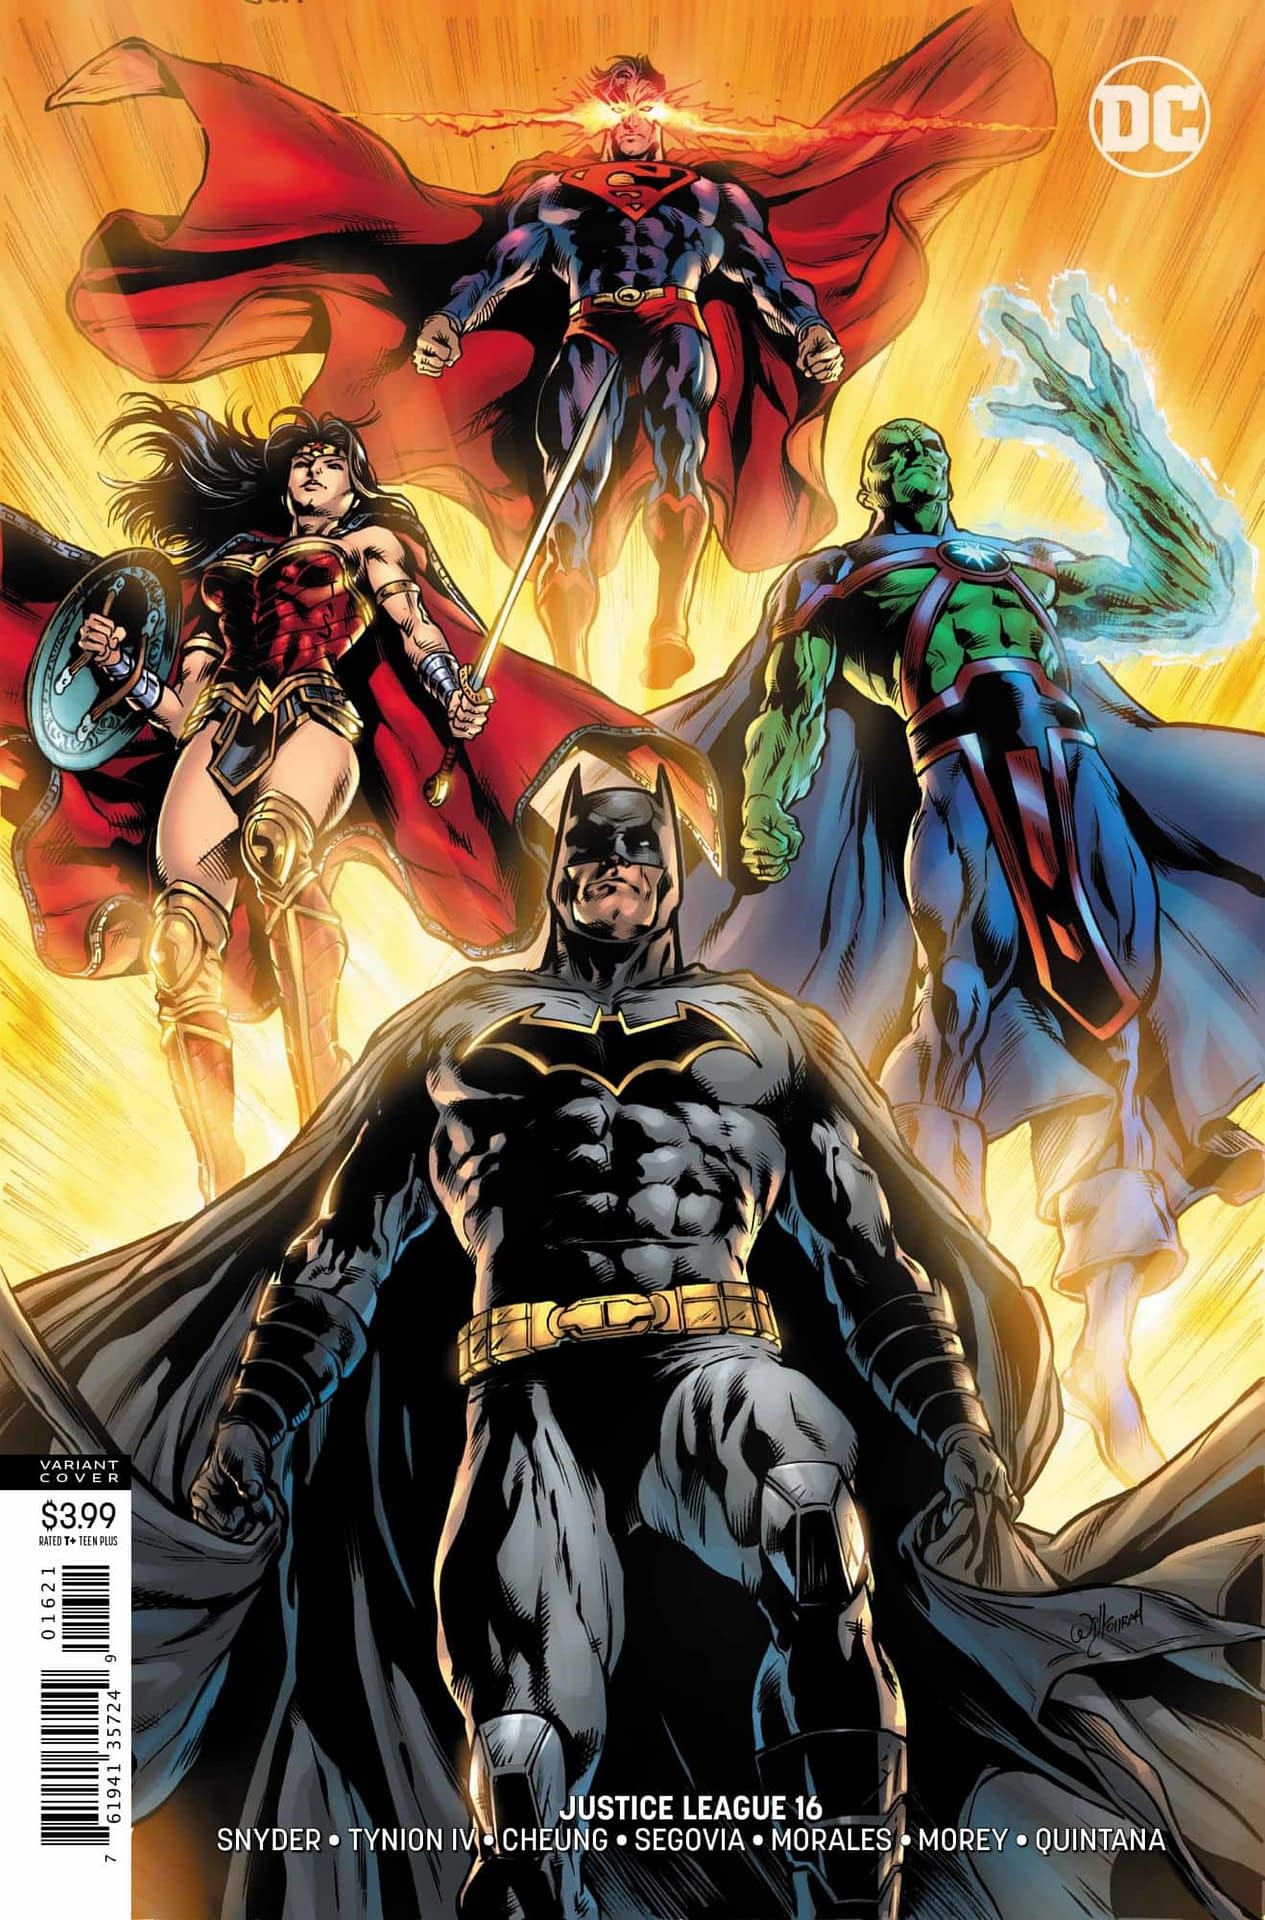 Find Out What Martian Manhunter Has in Common with Ike Perlmutter in This Week's Justice League #16